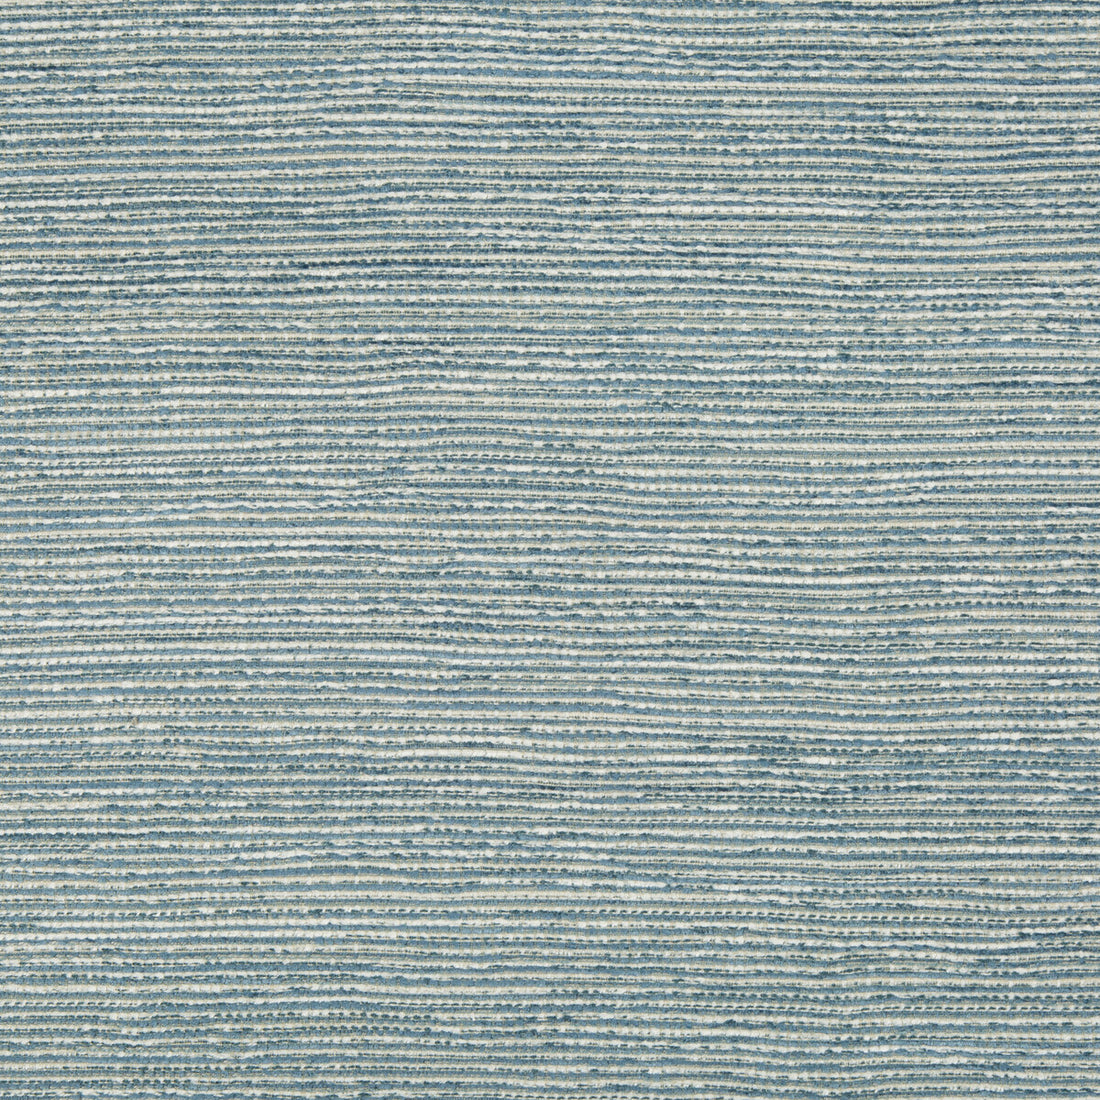 Kravet Contract fabric in 34734-505 color - pattern 34734.505.0 - by Kravet Contract in the Crypton Incase collection